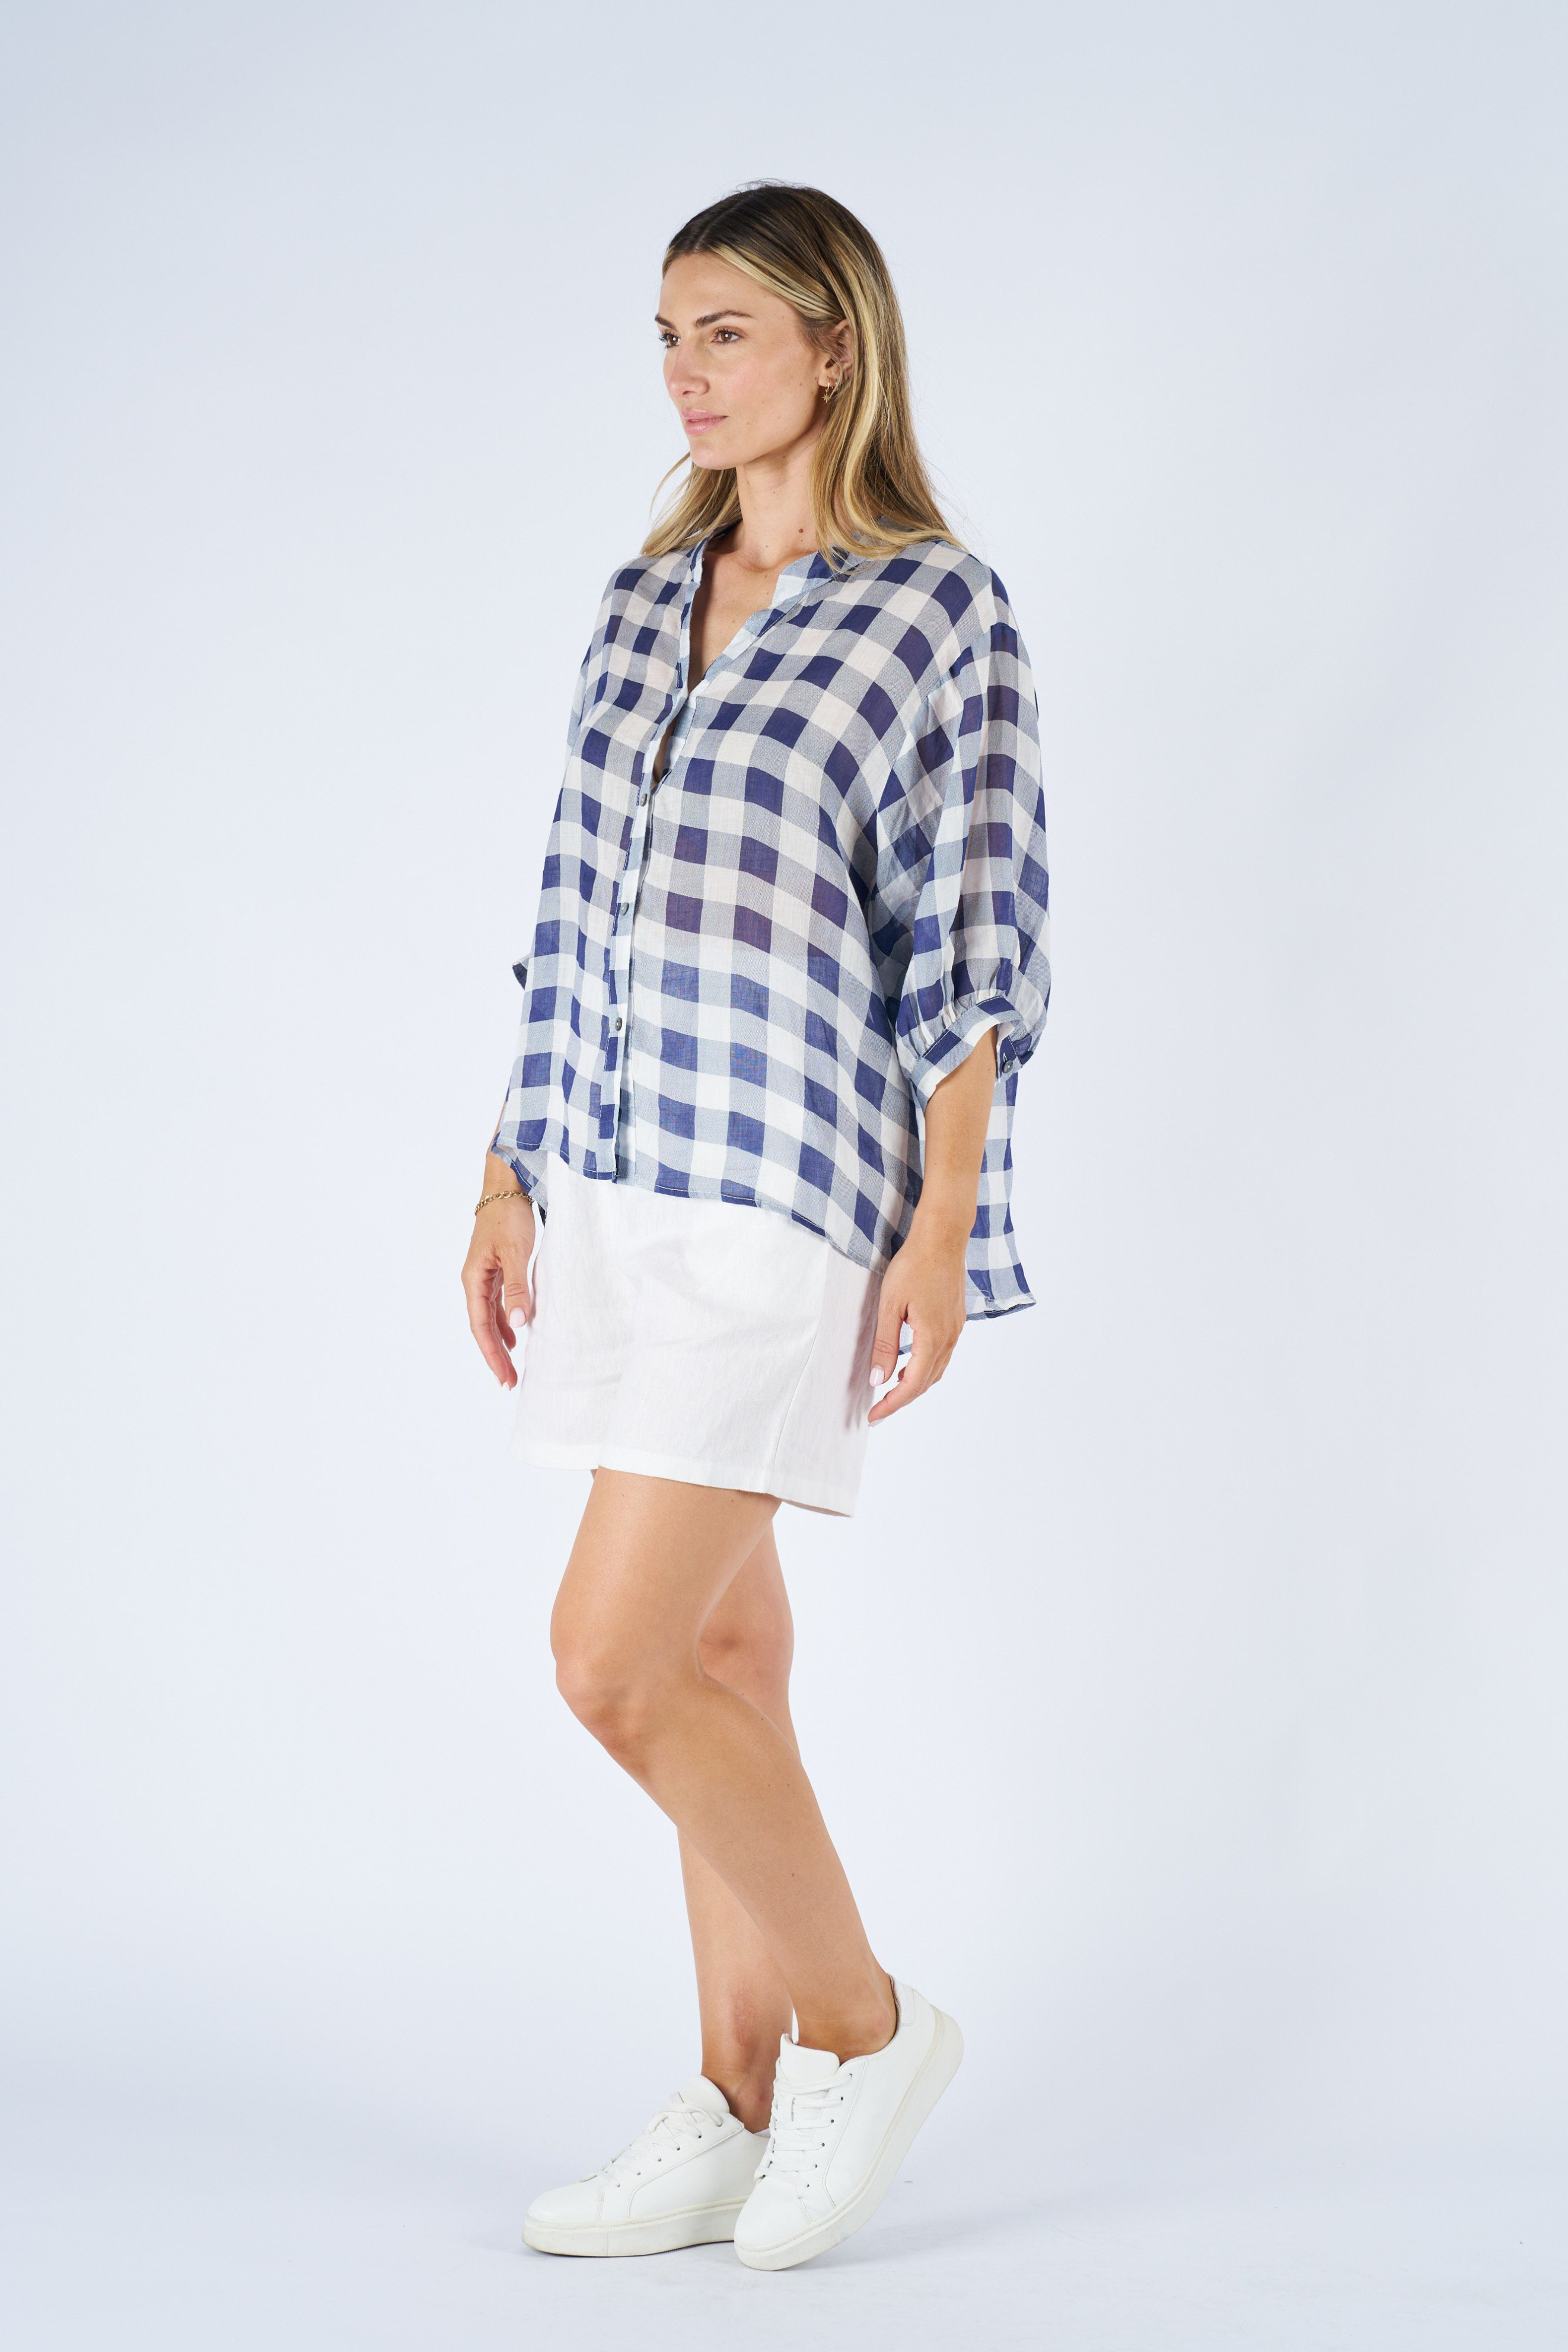 CHARLIE Top in Navy and White Check